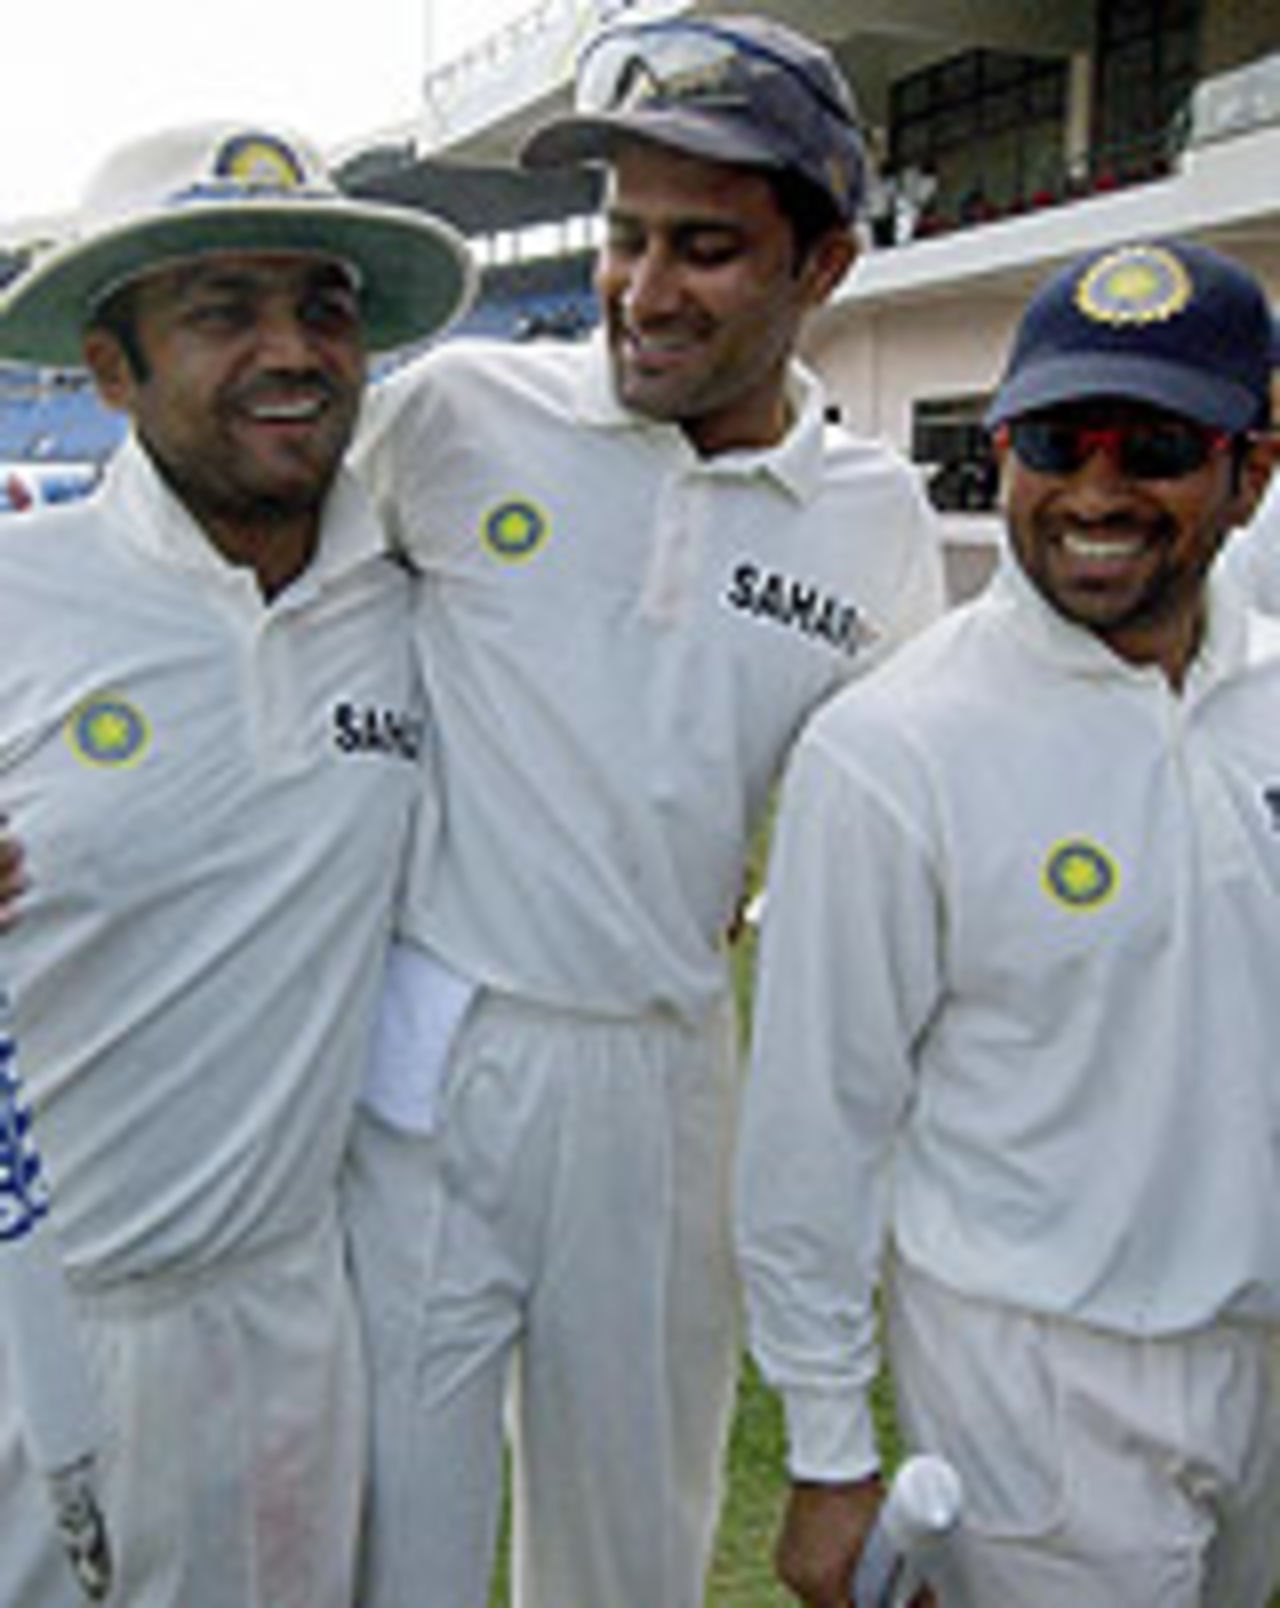 Virender Sehwag and Anil Kumble fool around after the match, Pakistan v India, 1st Test, Multan, 5th day, April 1, 2004